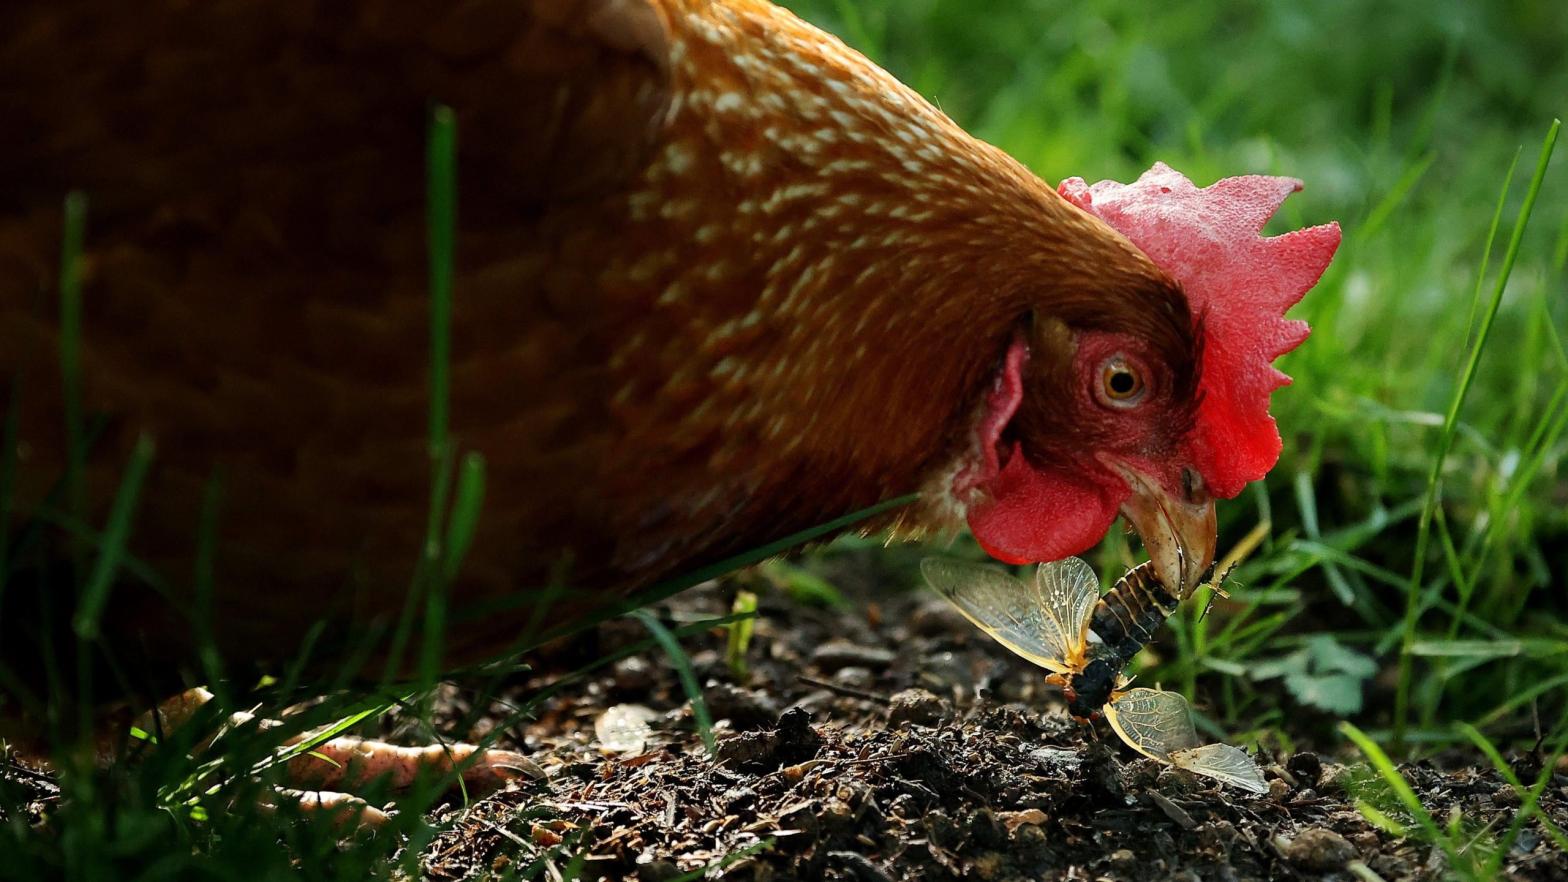 Annie, a domesticated Rhode Island red chicken, about to chow down on a newly moulted periodical cicada on May 20, 2021 in Takoma Park, Maryland. (Photo: Chip Somodevilla, Getty Images)